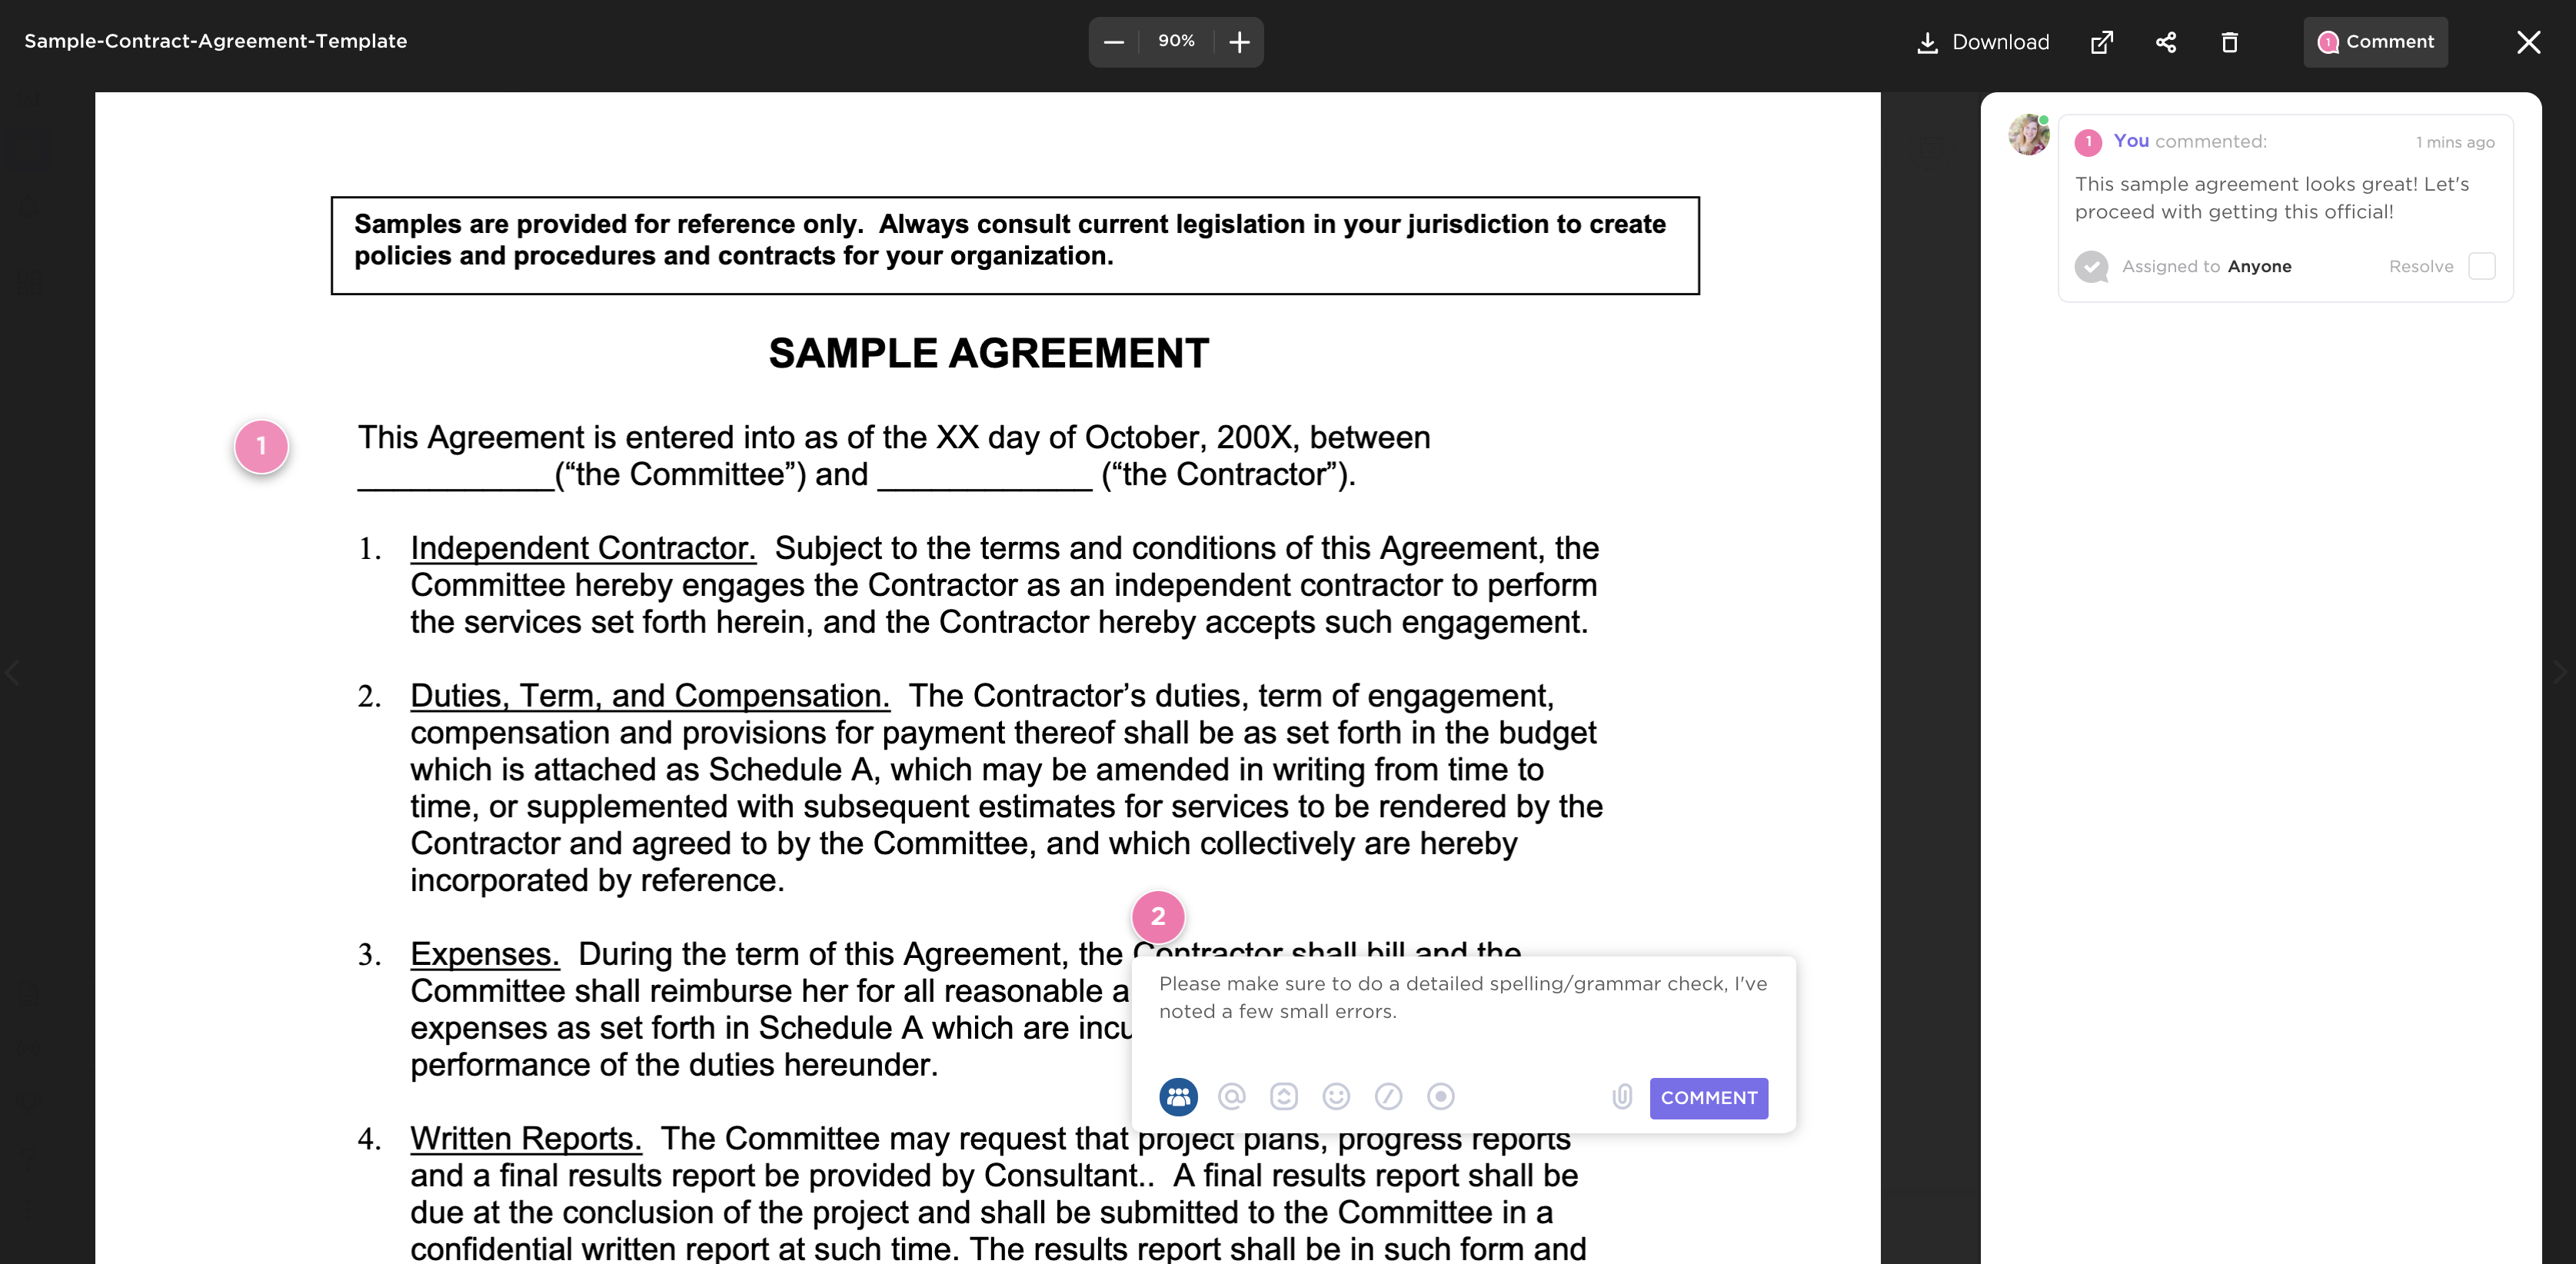 Screenshot example of ClickUp proofing on image.